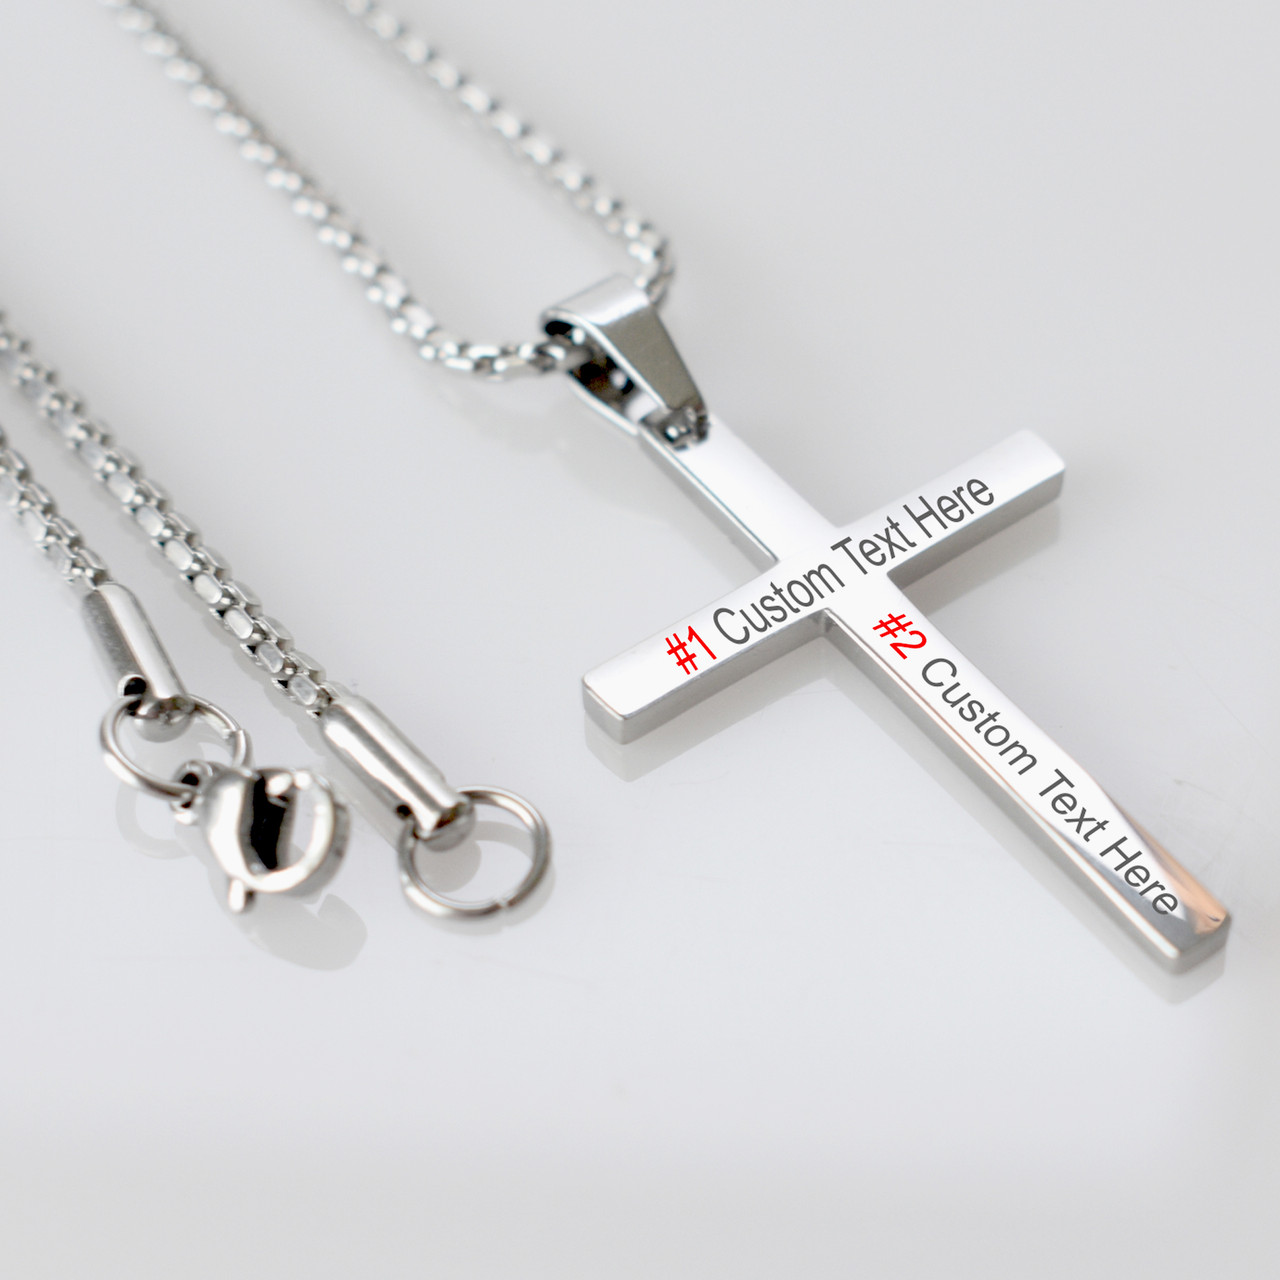 The Heart Cross - Larger Cross Pendant - Rope Necklace or Omega - 709